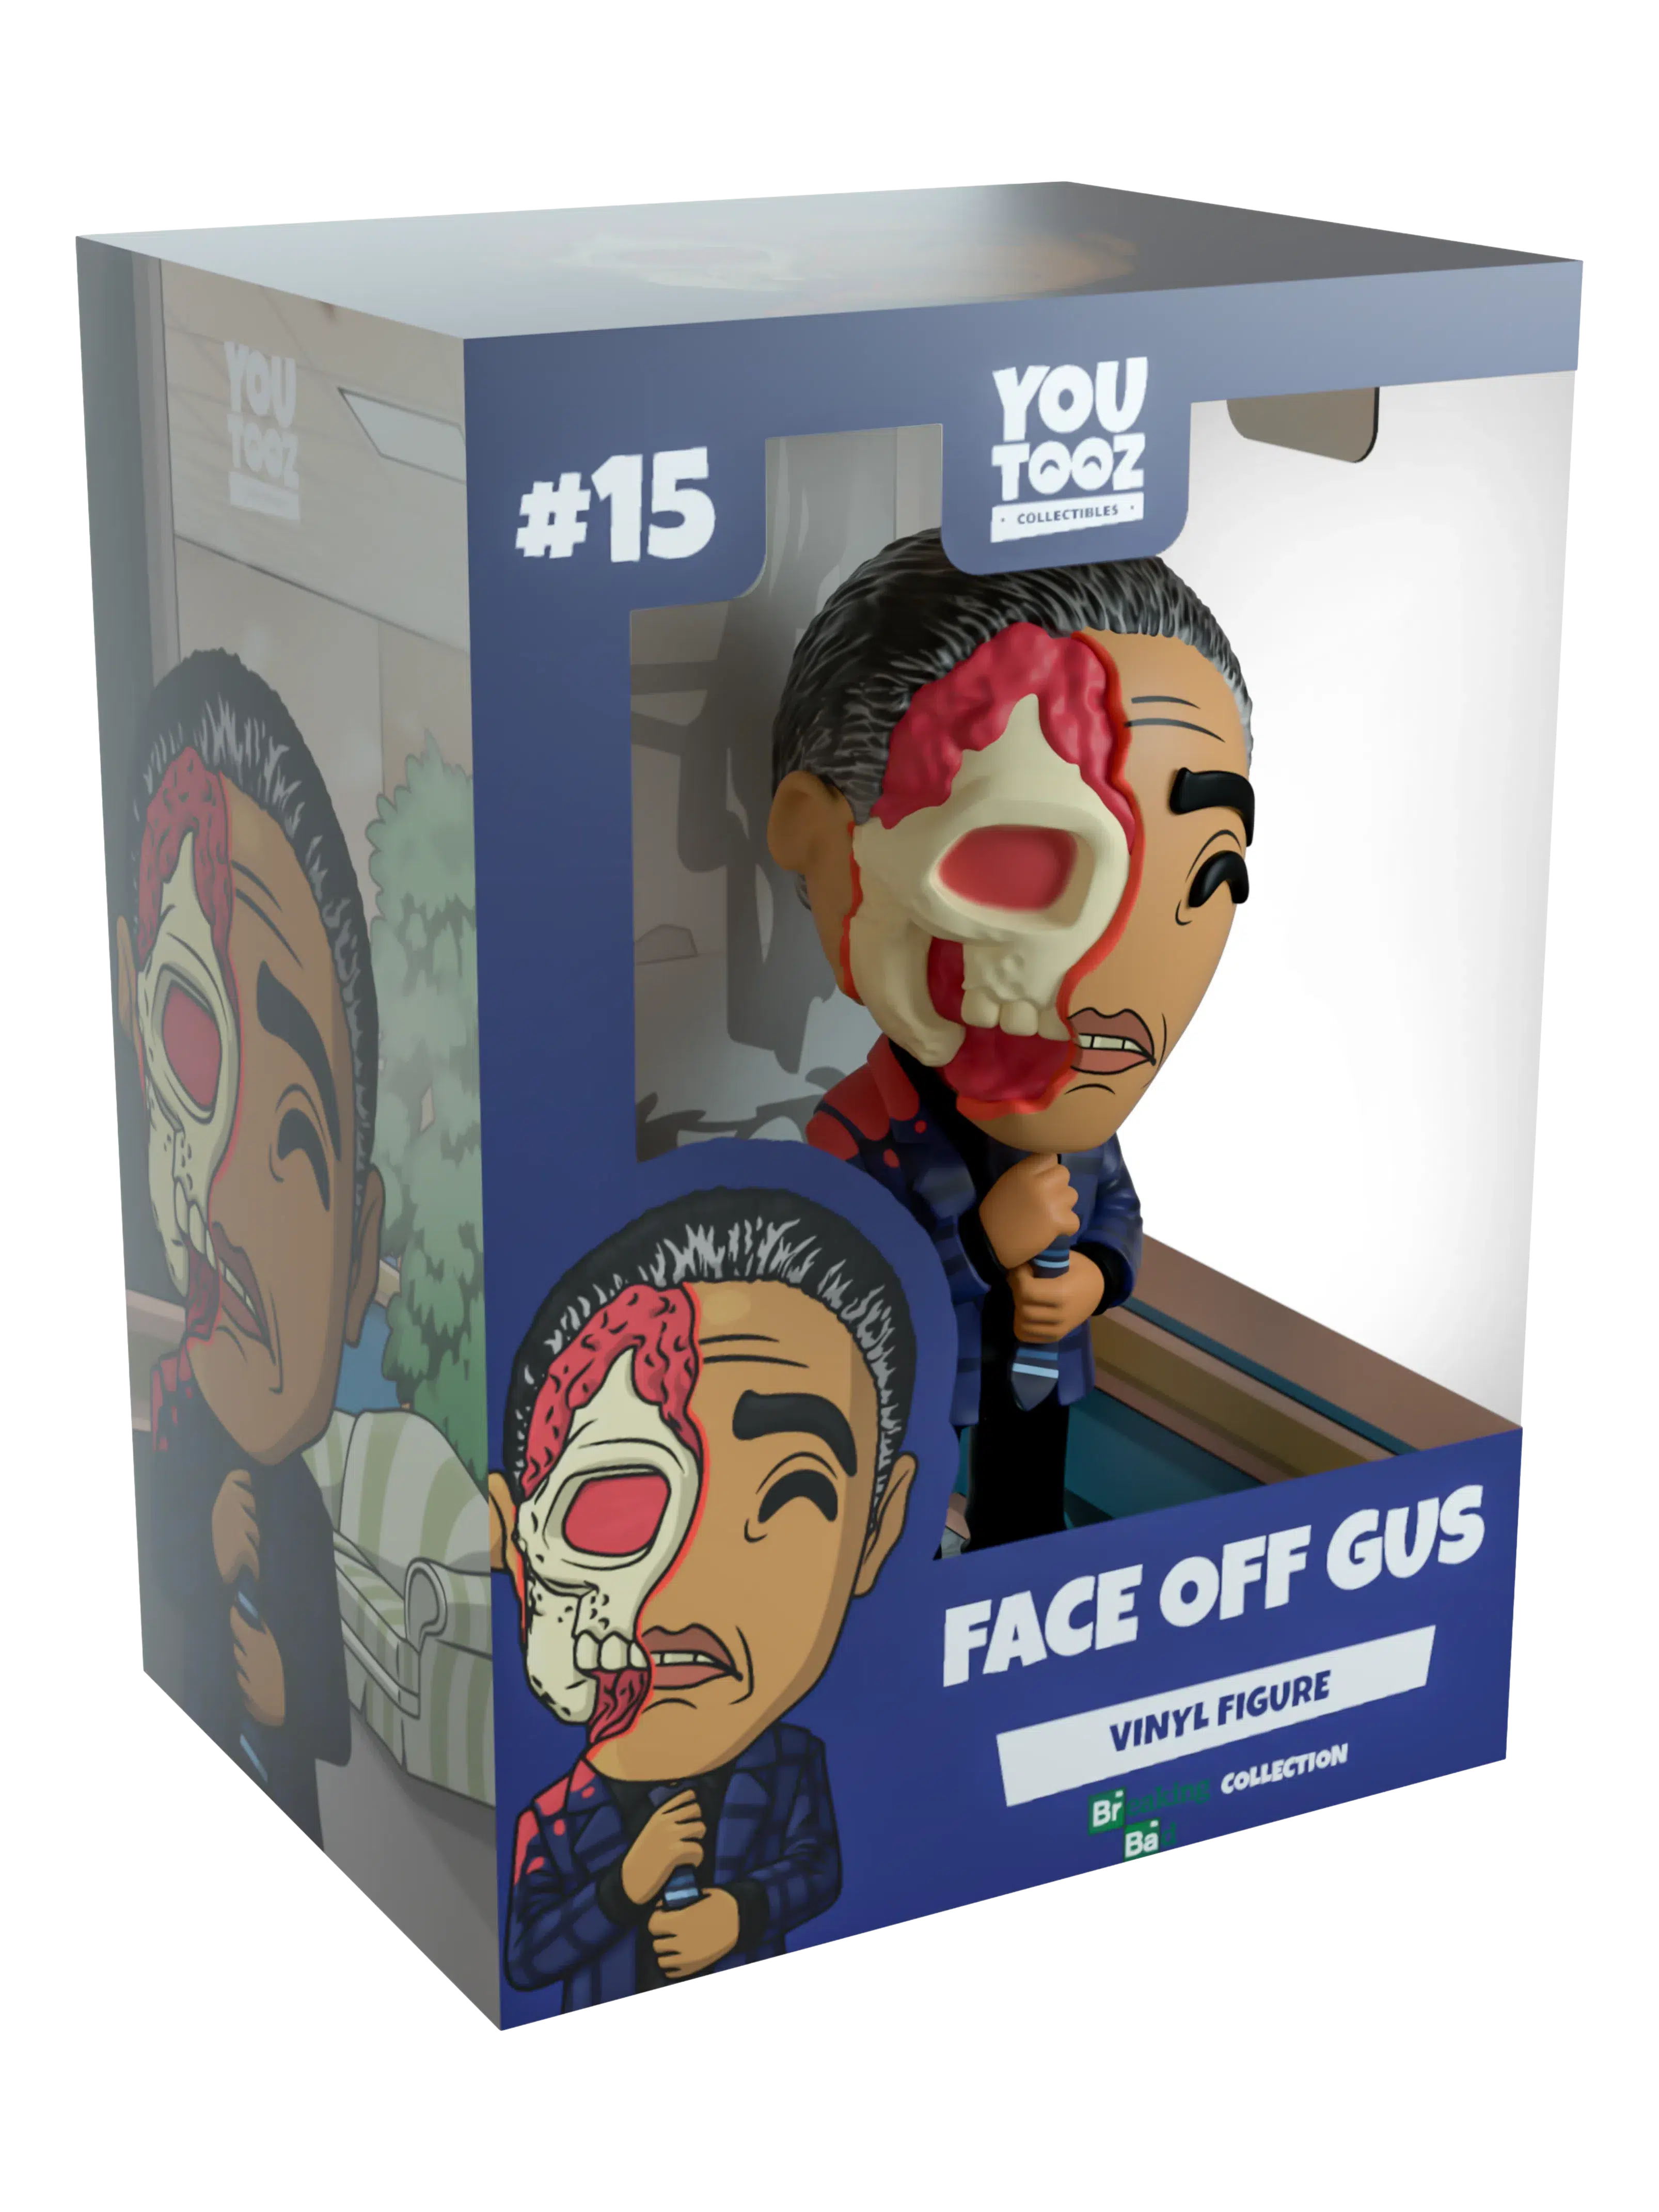 Breaking Bad: Face Off Gus: YouTooz